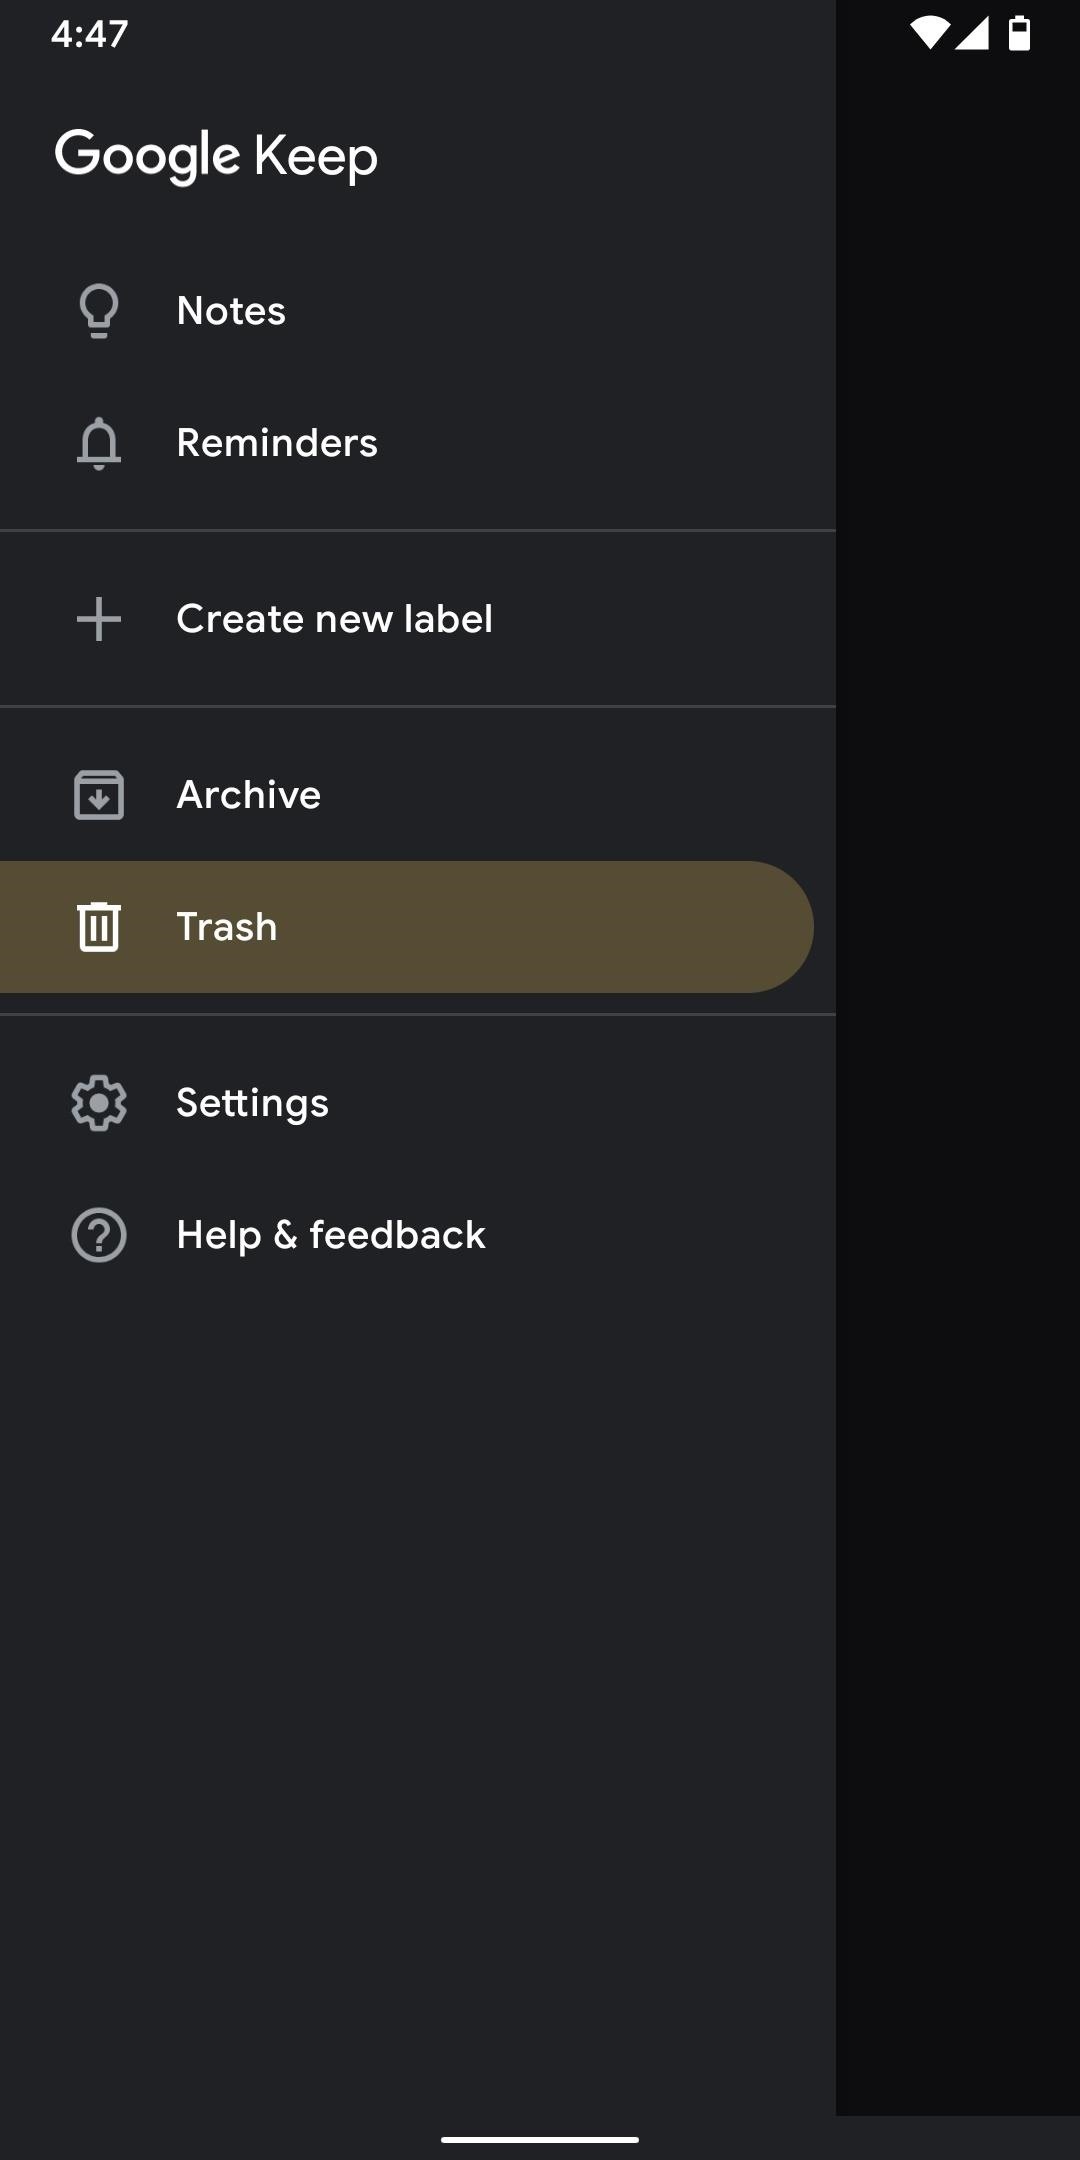 How to Retrieve Deleted Notes on Google Keep